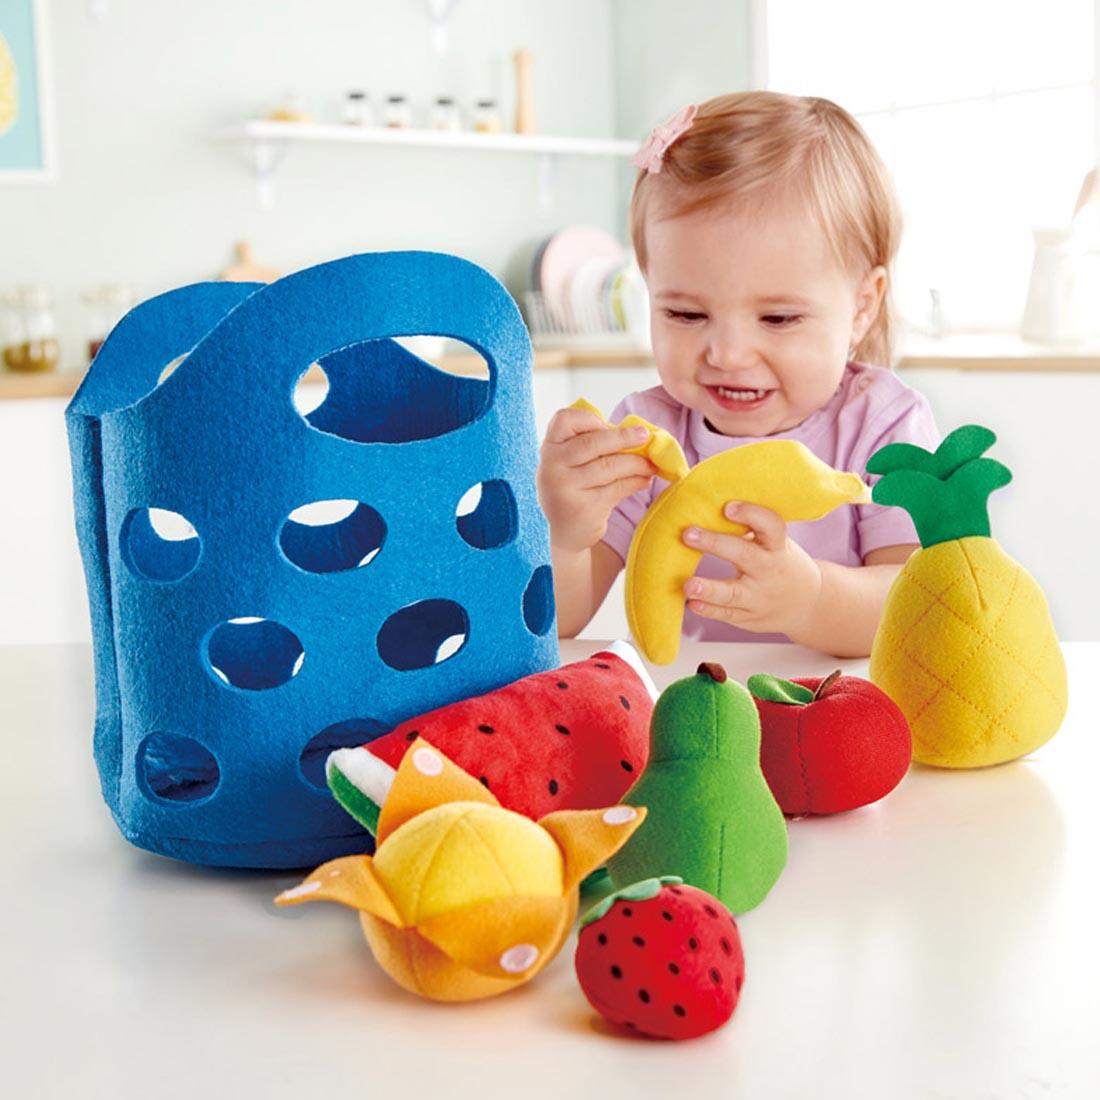 Child playing with the Toddler Fruit Basket By Hape